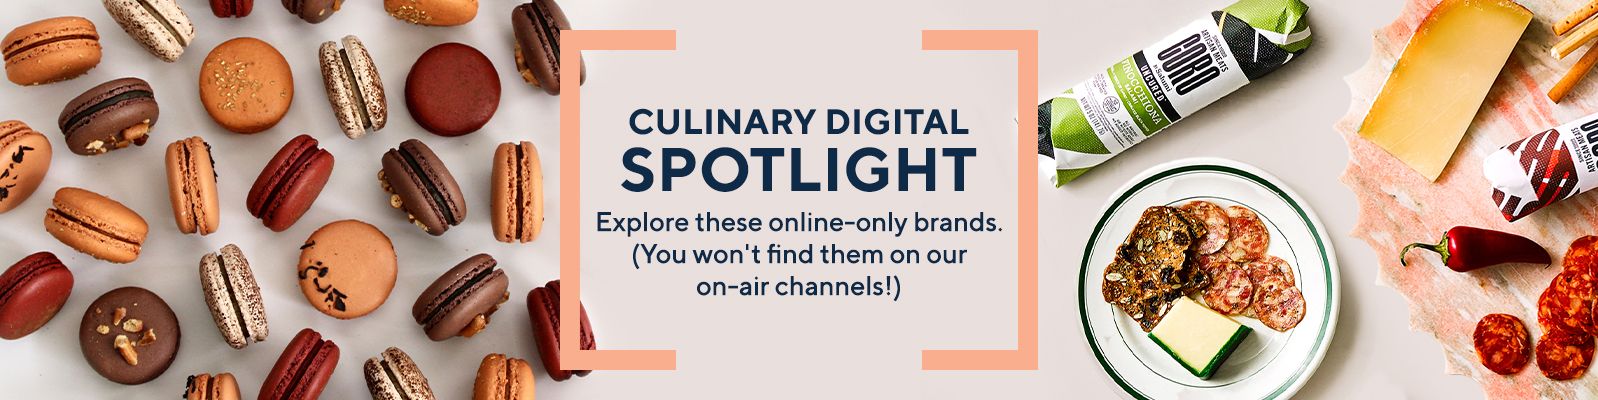 Culinary Digital Spotlight   Explore these online-only brands. (You won't find them on our on-air channels!)